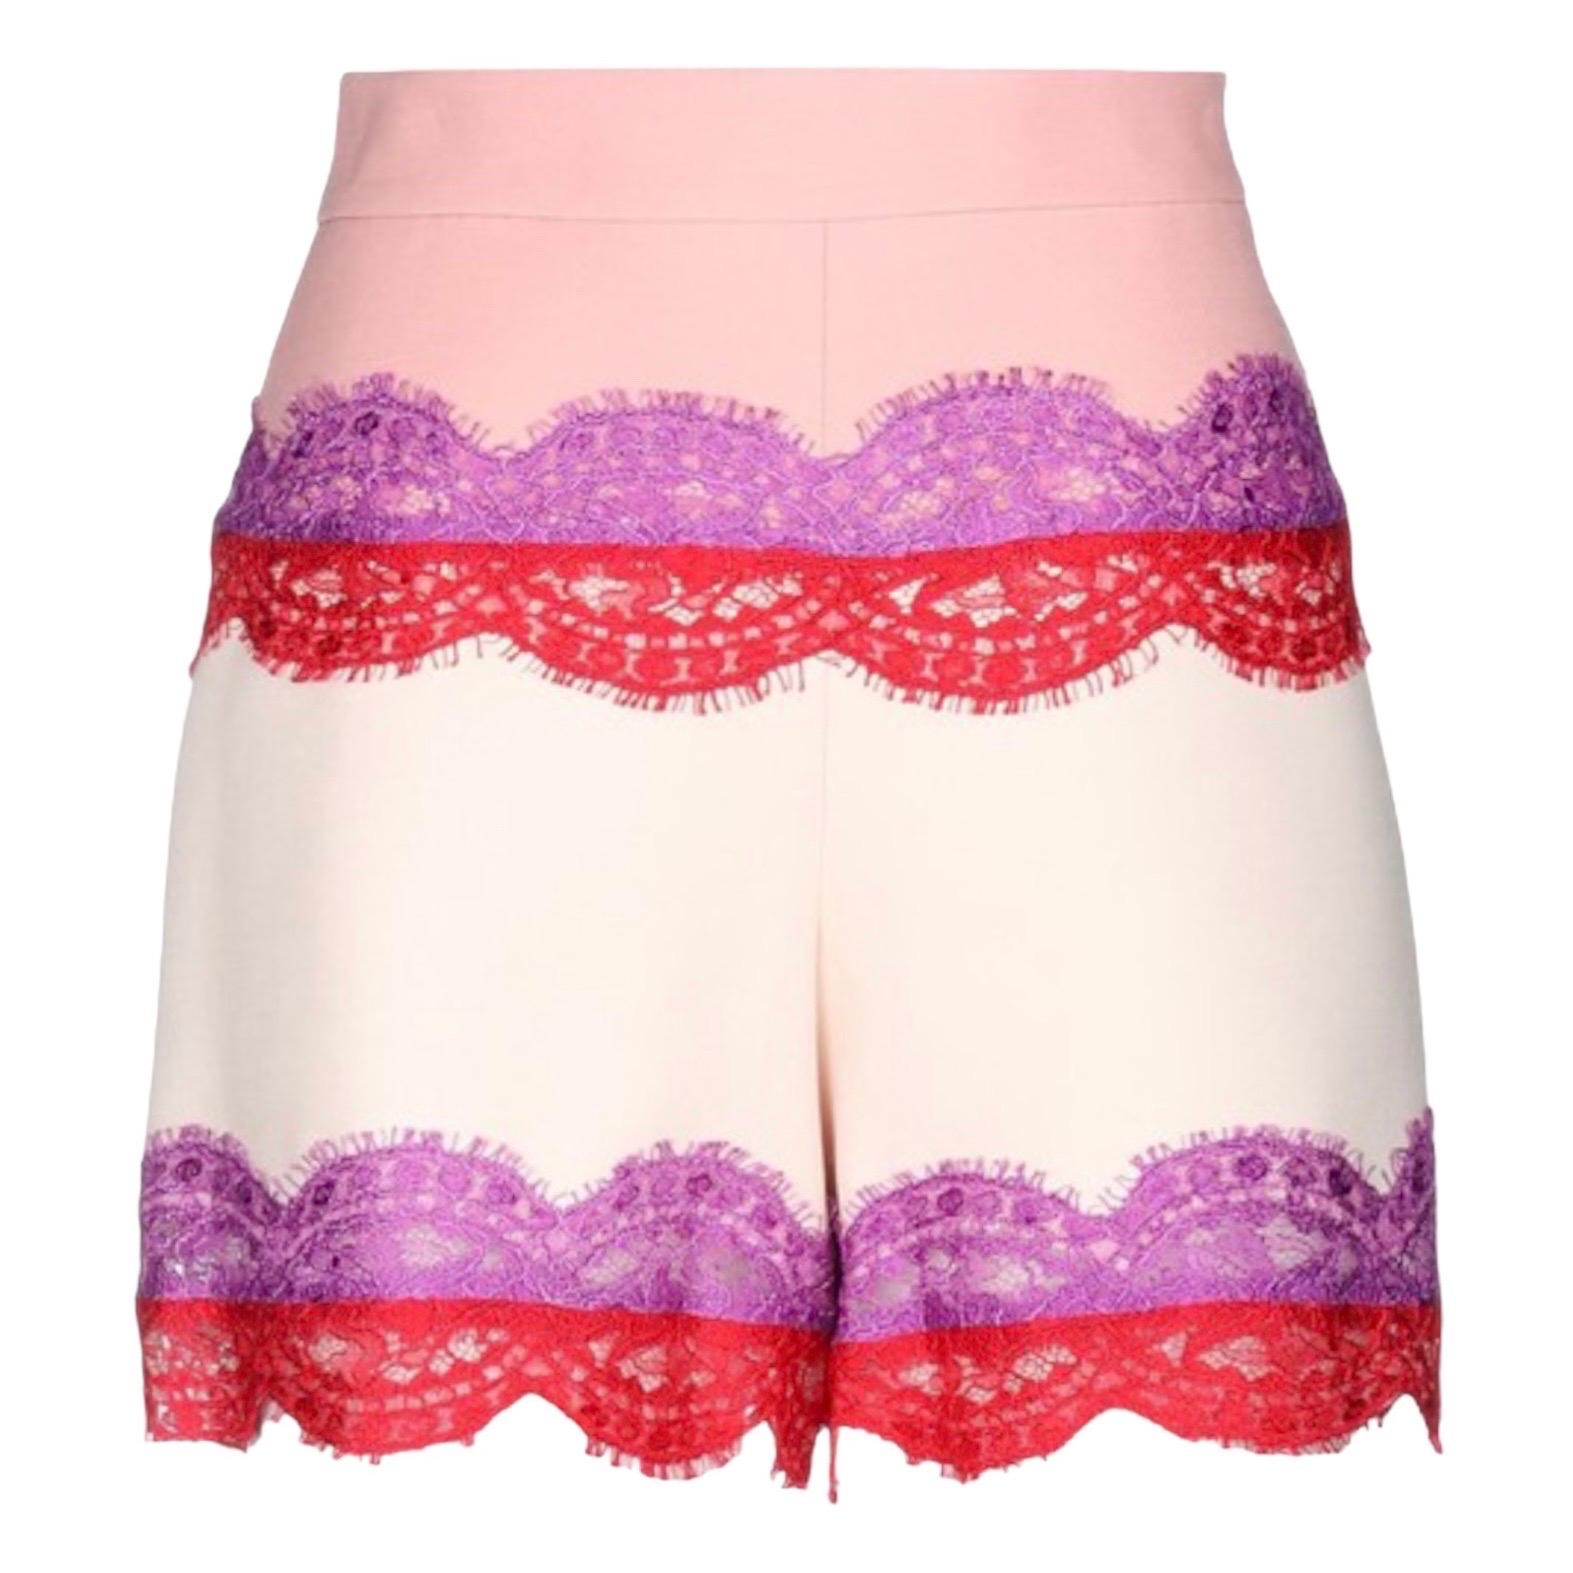 NEW Emilio Pucci Pink Hot Pants Shorts with Lace Trimmings 44 For Sale 2